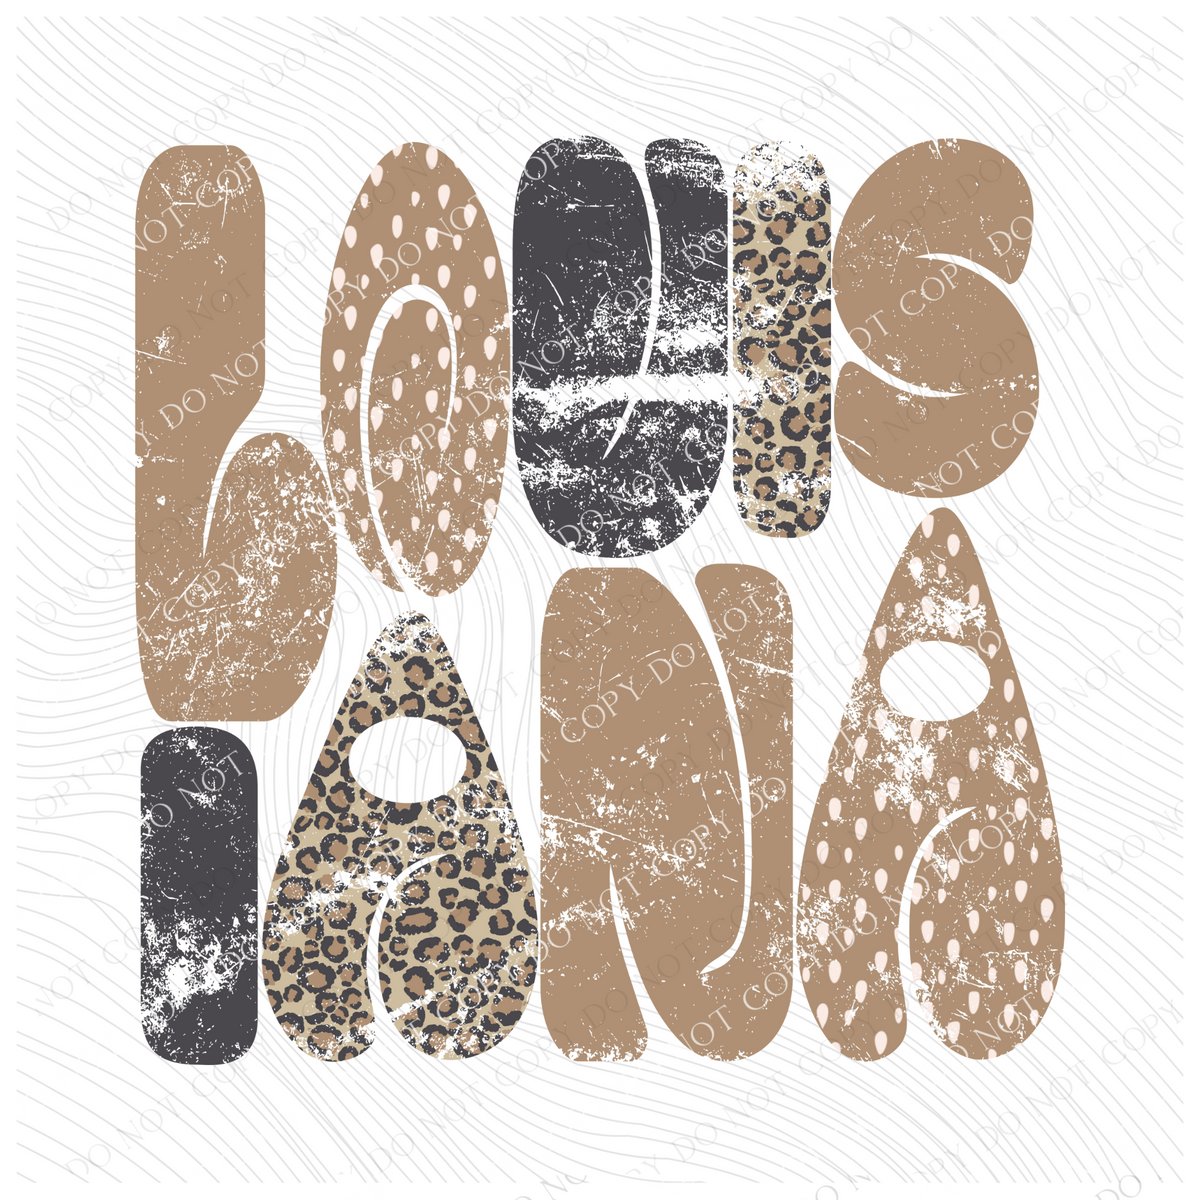 Louisiana Chubby Retro Distressed Leopard print in tones of Tans & Faded Black Digital Design, PNG